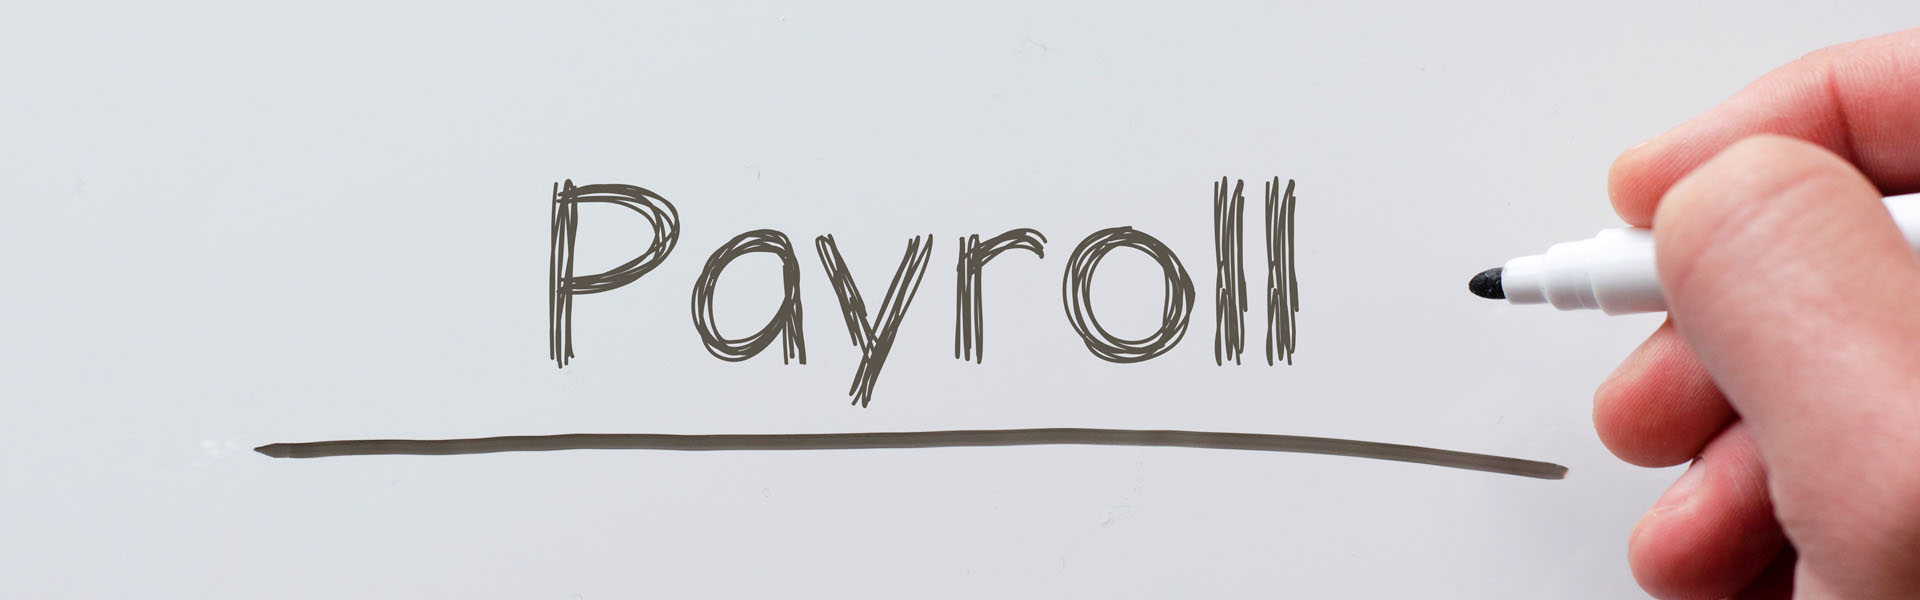 payroll services image